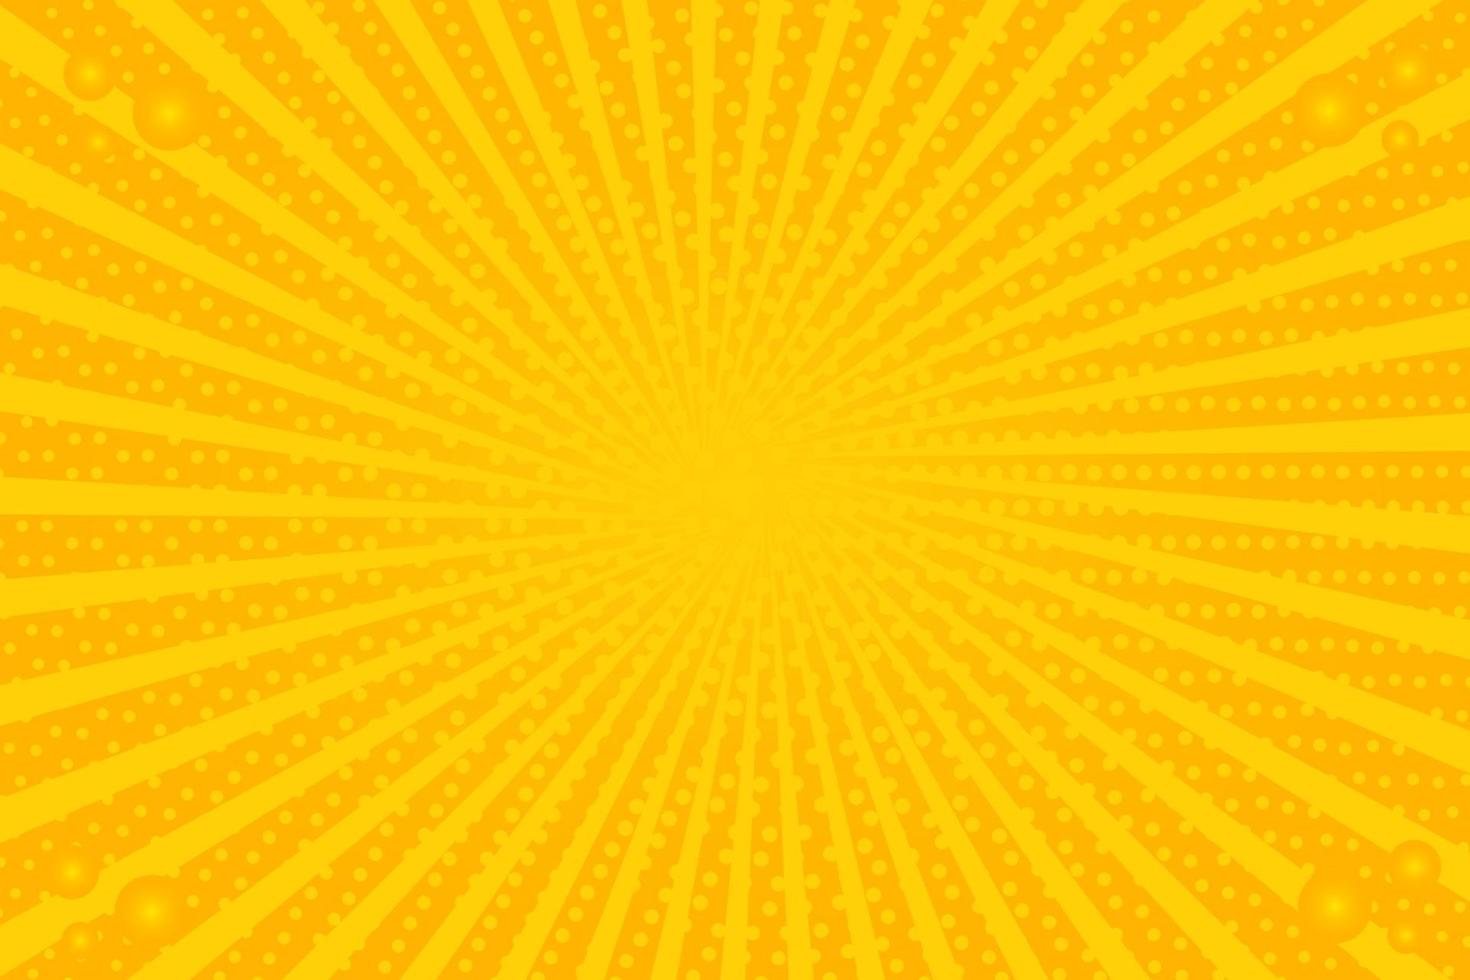 Yellow Retro Vintage Background With Sun Rays vector